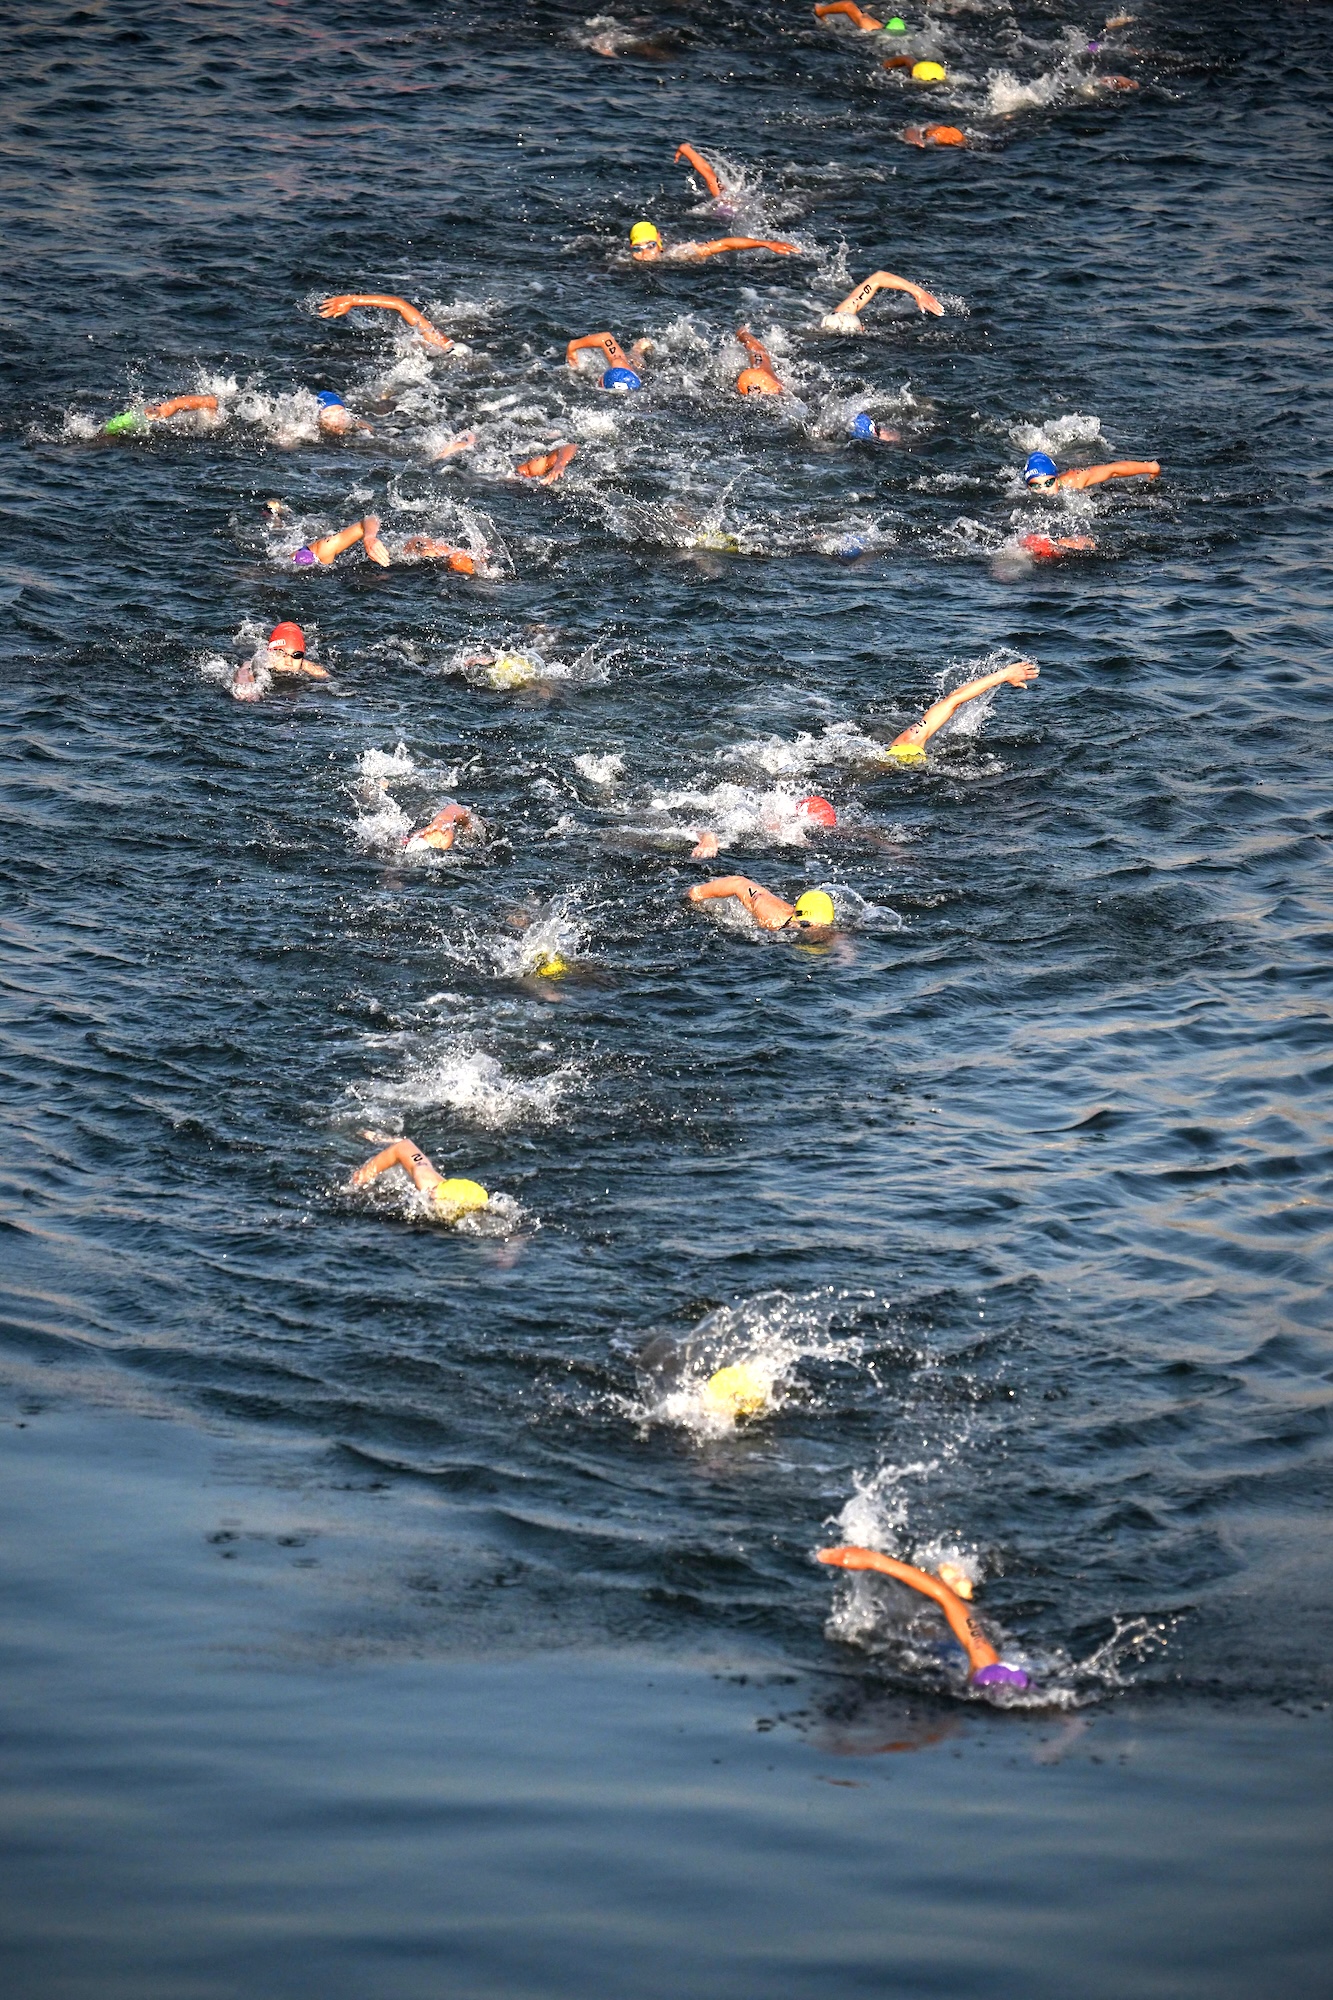 Triathlon athletes compete and swim in the Seine river during a test event for the women's triathlon for the upcoming 2024 Olympic Games in Paris on Aug. 17, 2023